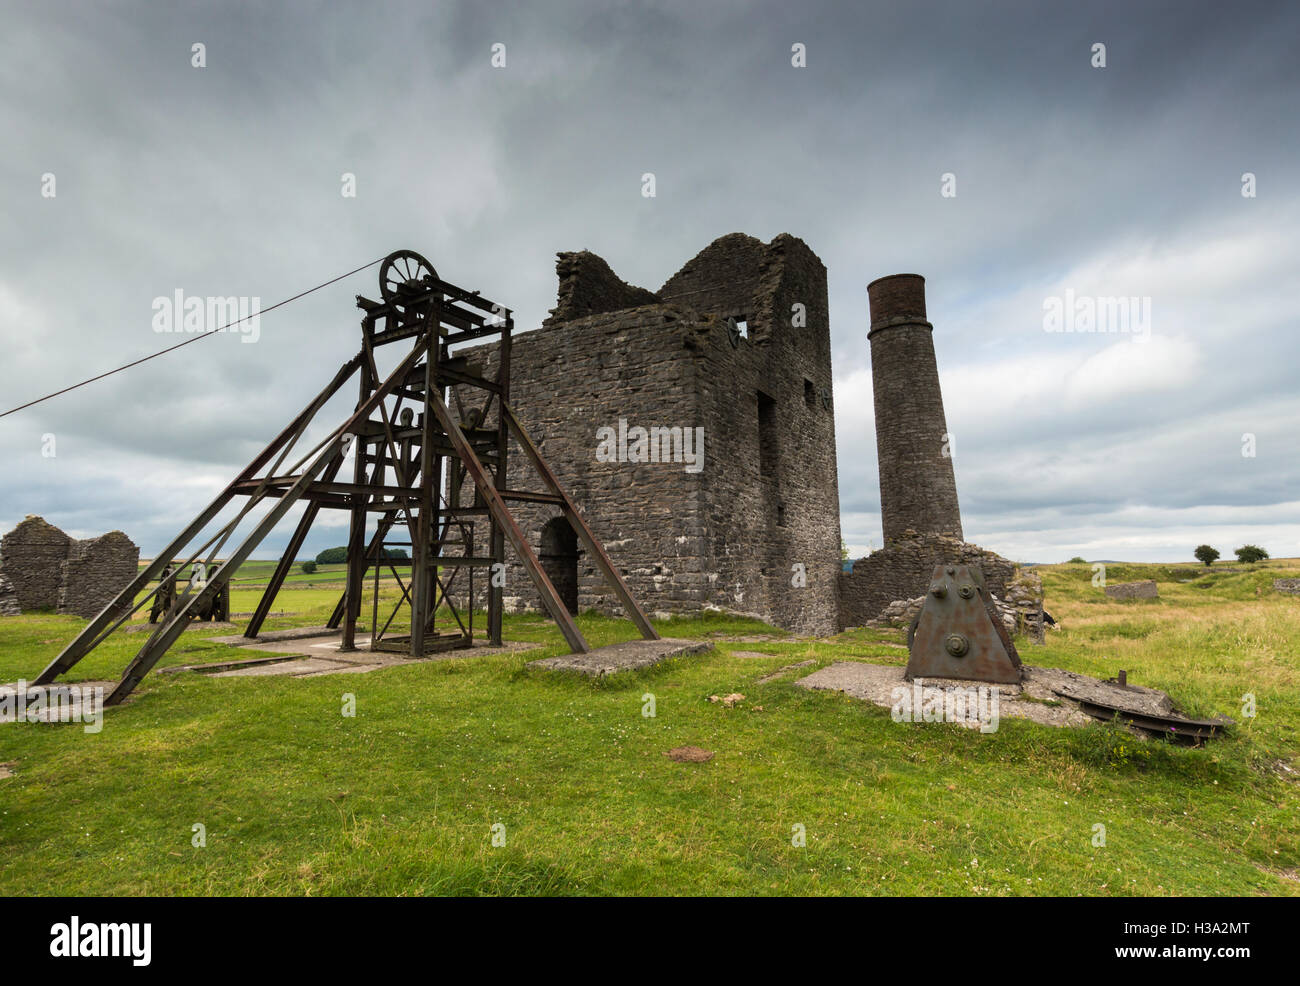 A derelict building at a disused mine, Magpie Mine, in the Peak District Stock Photo